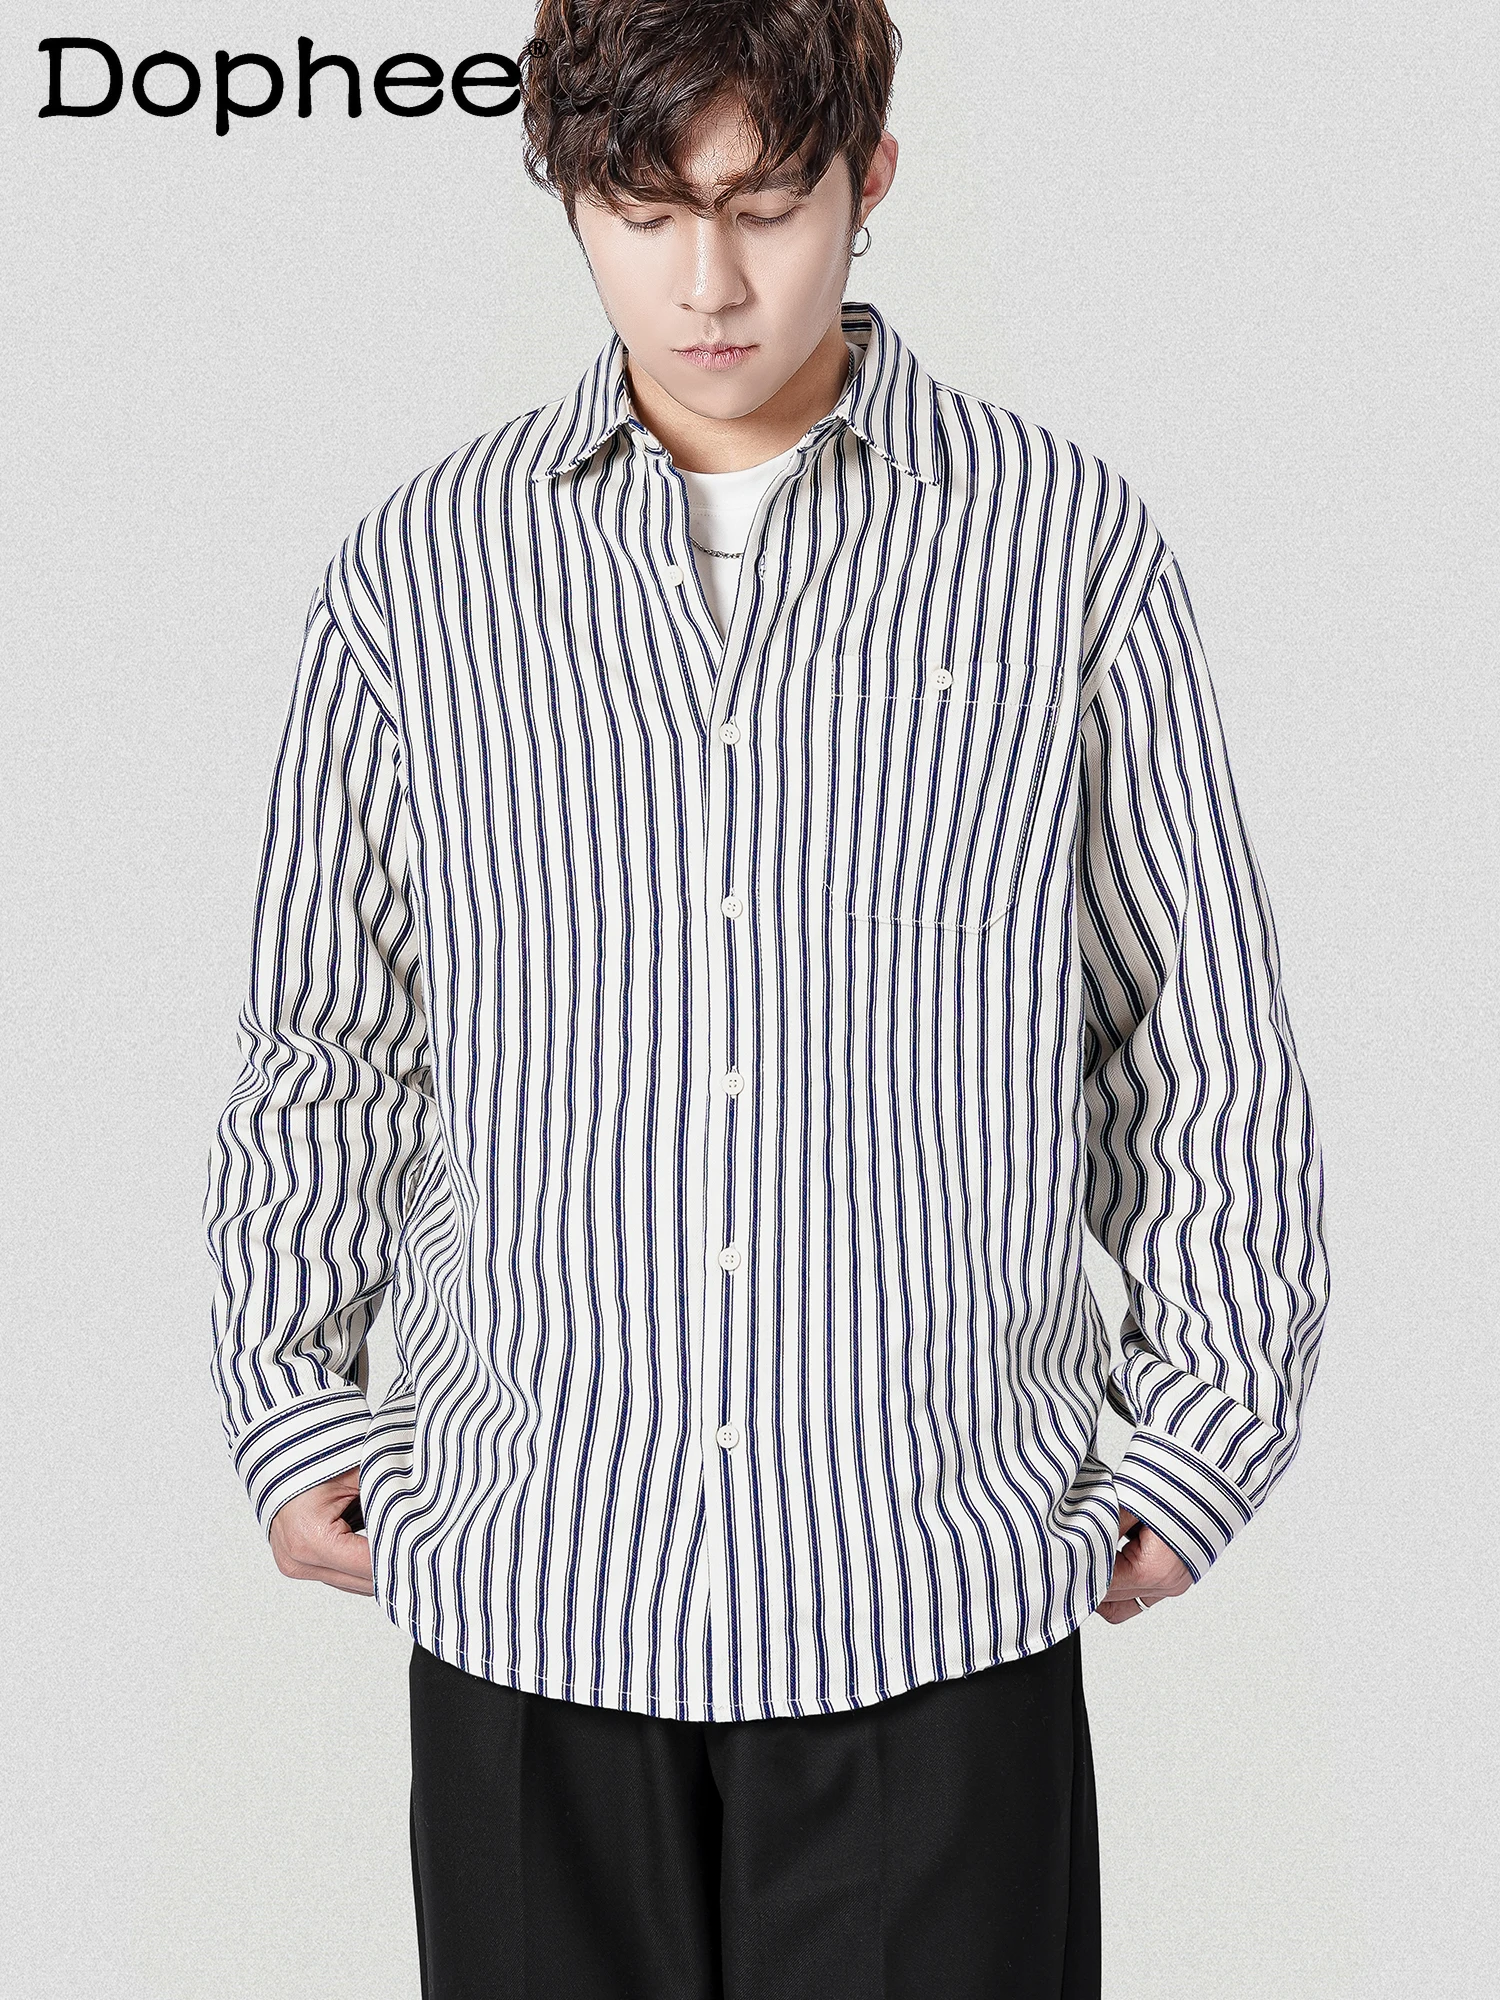 Fashionable 2023 Striped Long-Sleeve Shirt Men's Autumn Winter Shirt Handsome Jacket Gentleman Men's Single-Breasted Shirt african new men set crew neck gentleman long shirt and social casual pants two pieces wedding party wear men clothing suits 2022